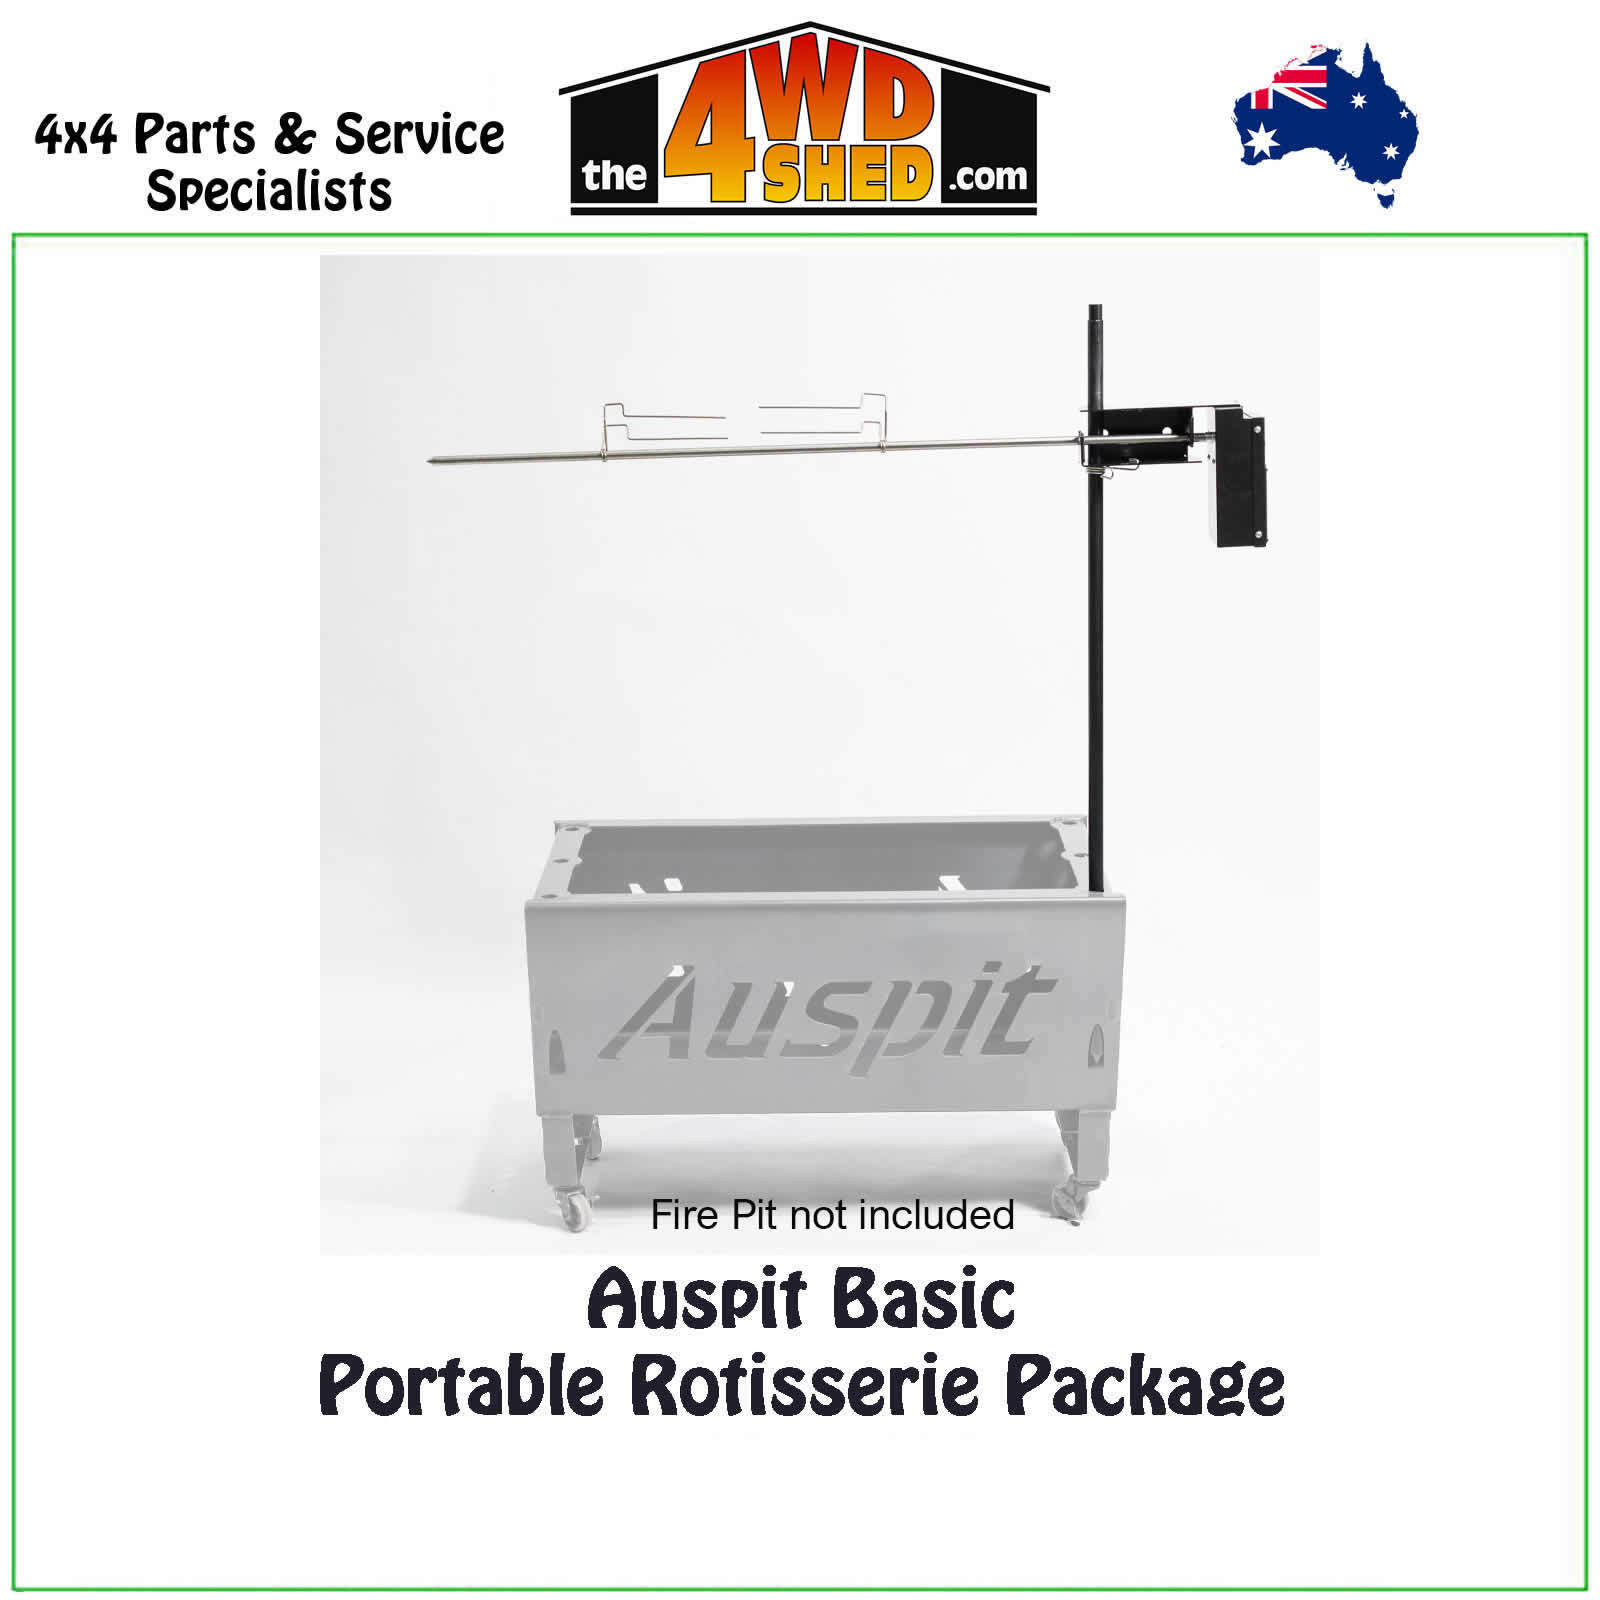 <span style="font-size: 18px;">Auspit Basic Portable Rotisserie Package</span>